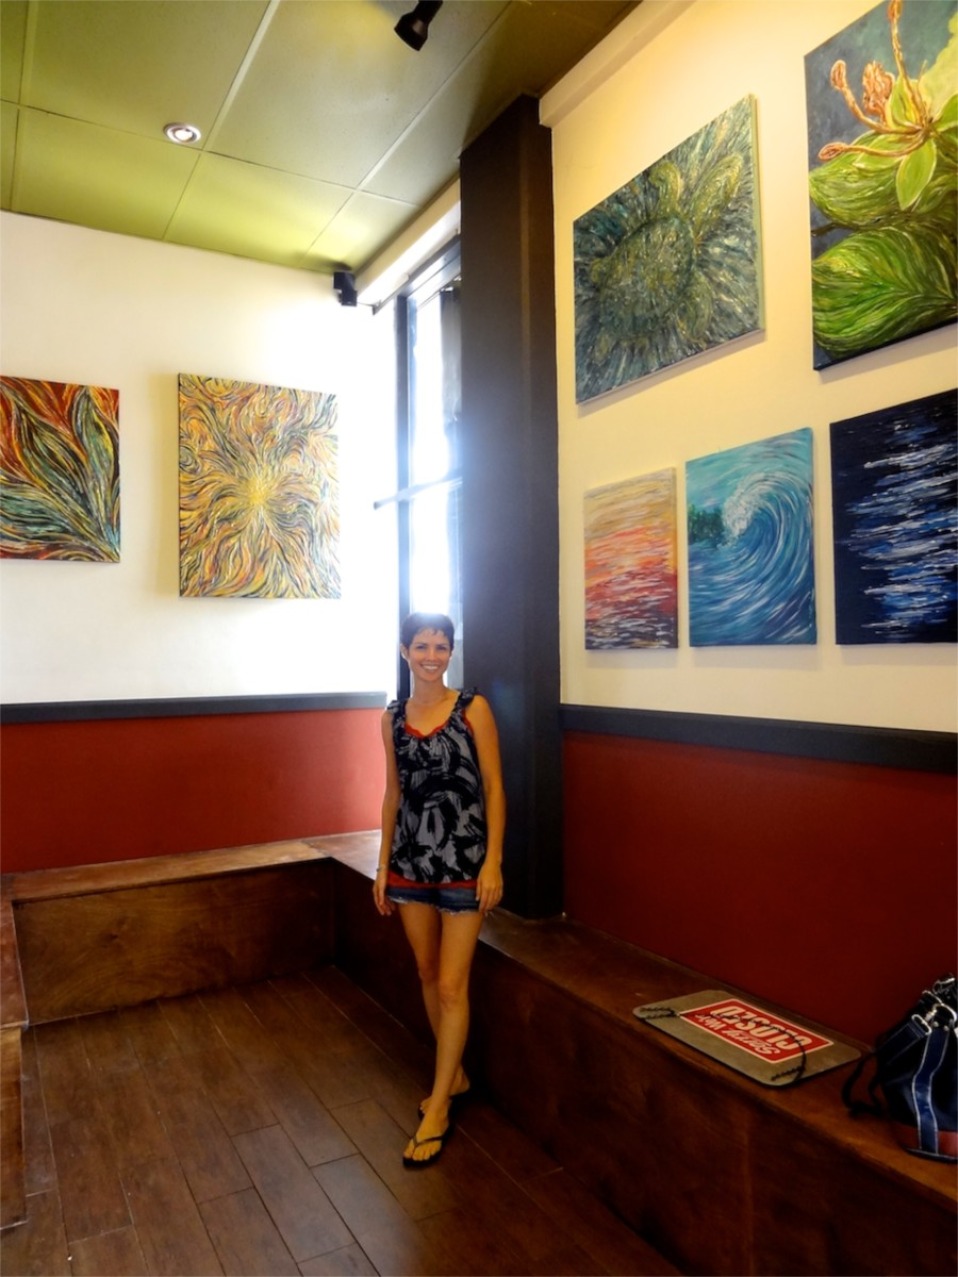 Pika’s Cafe Guam: Showcasing exhibits from featured local artists